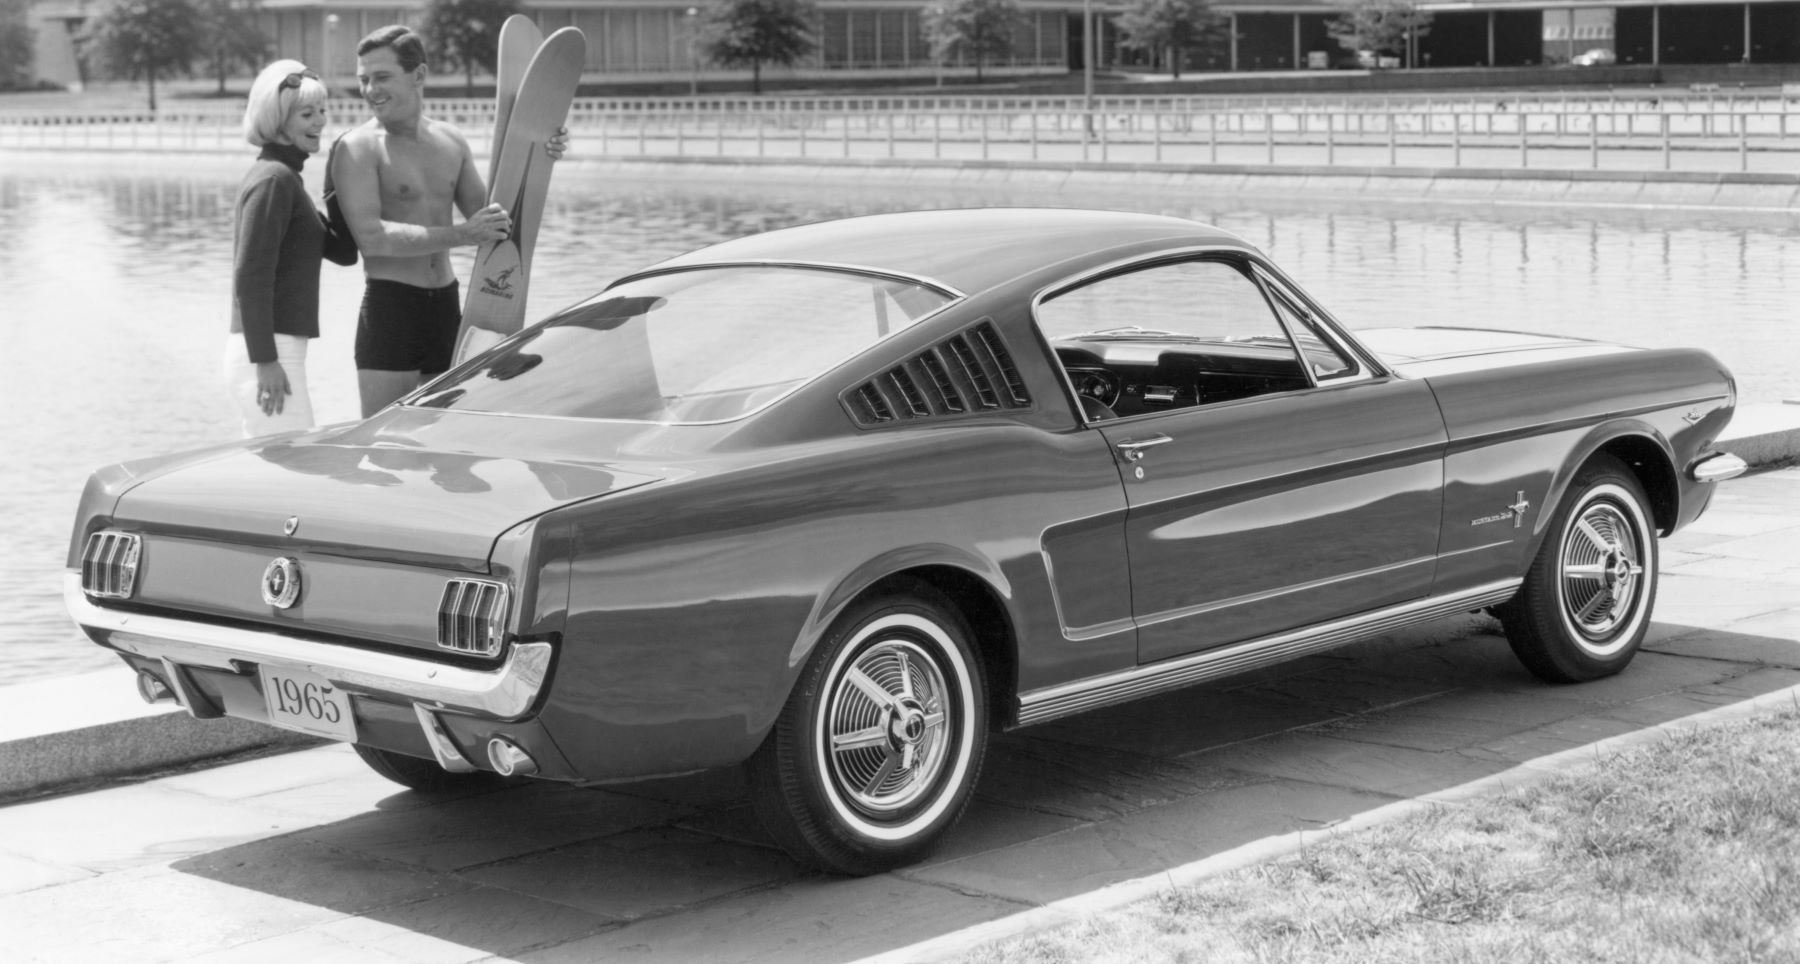 A 1965 Ford Mustang Fastback with two people standing next to it